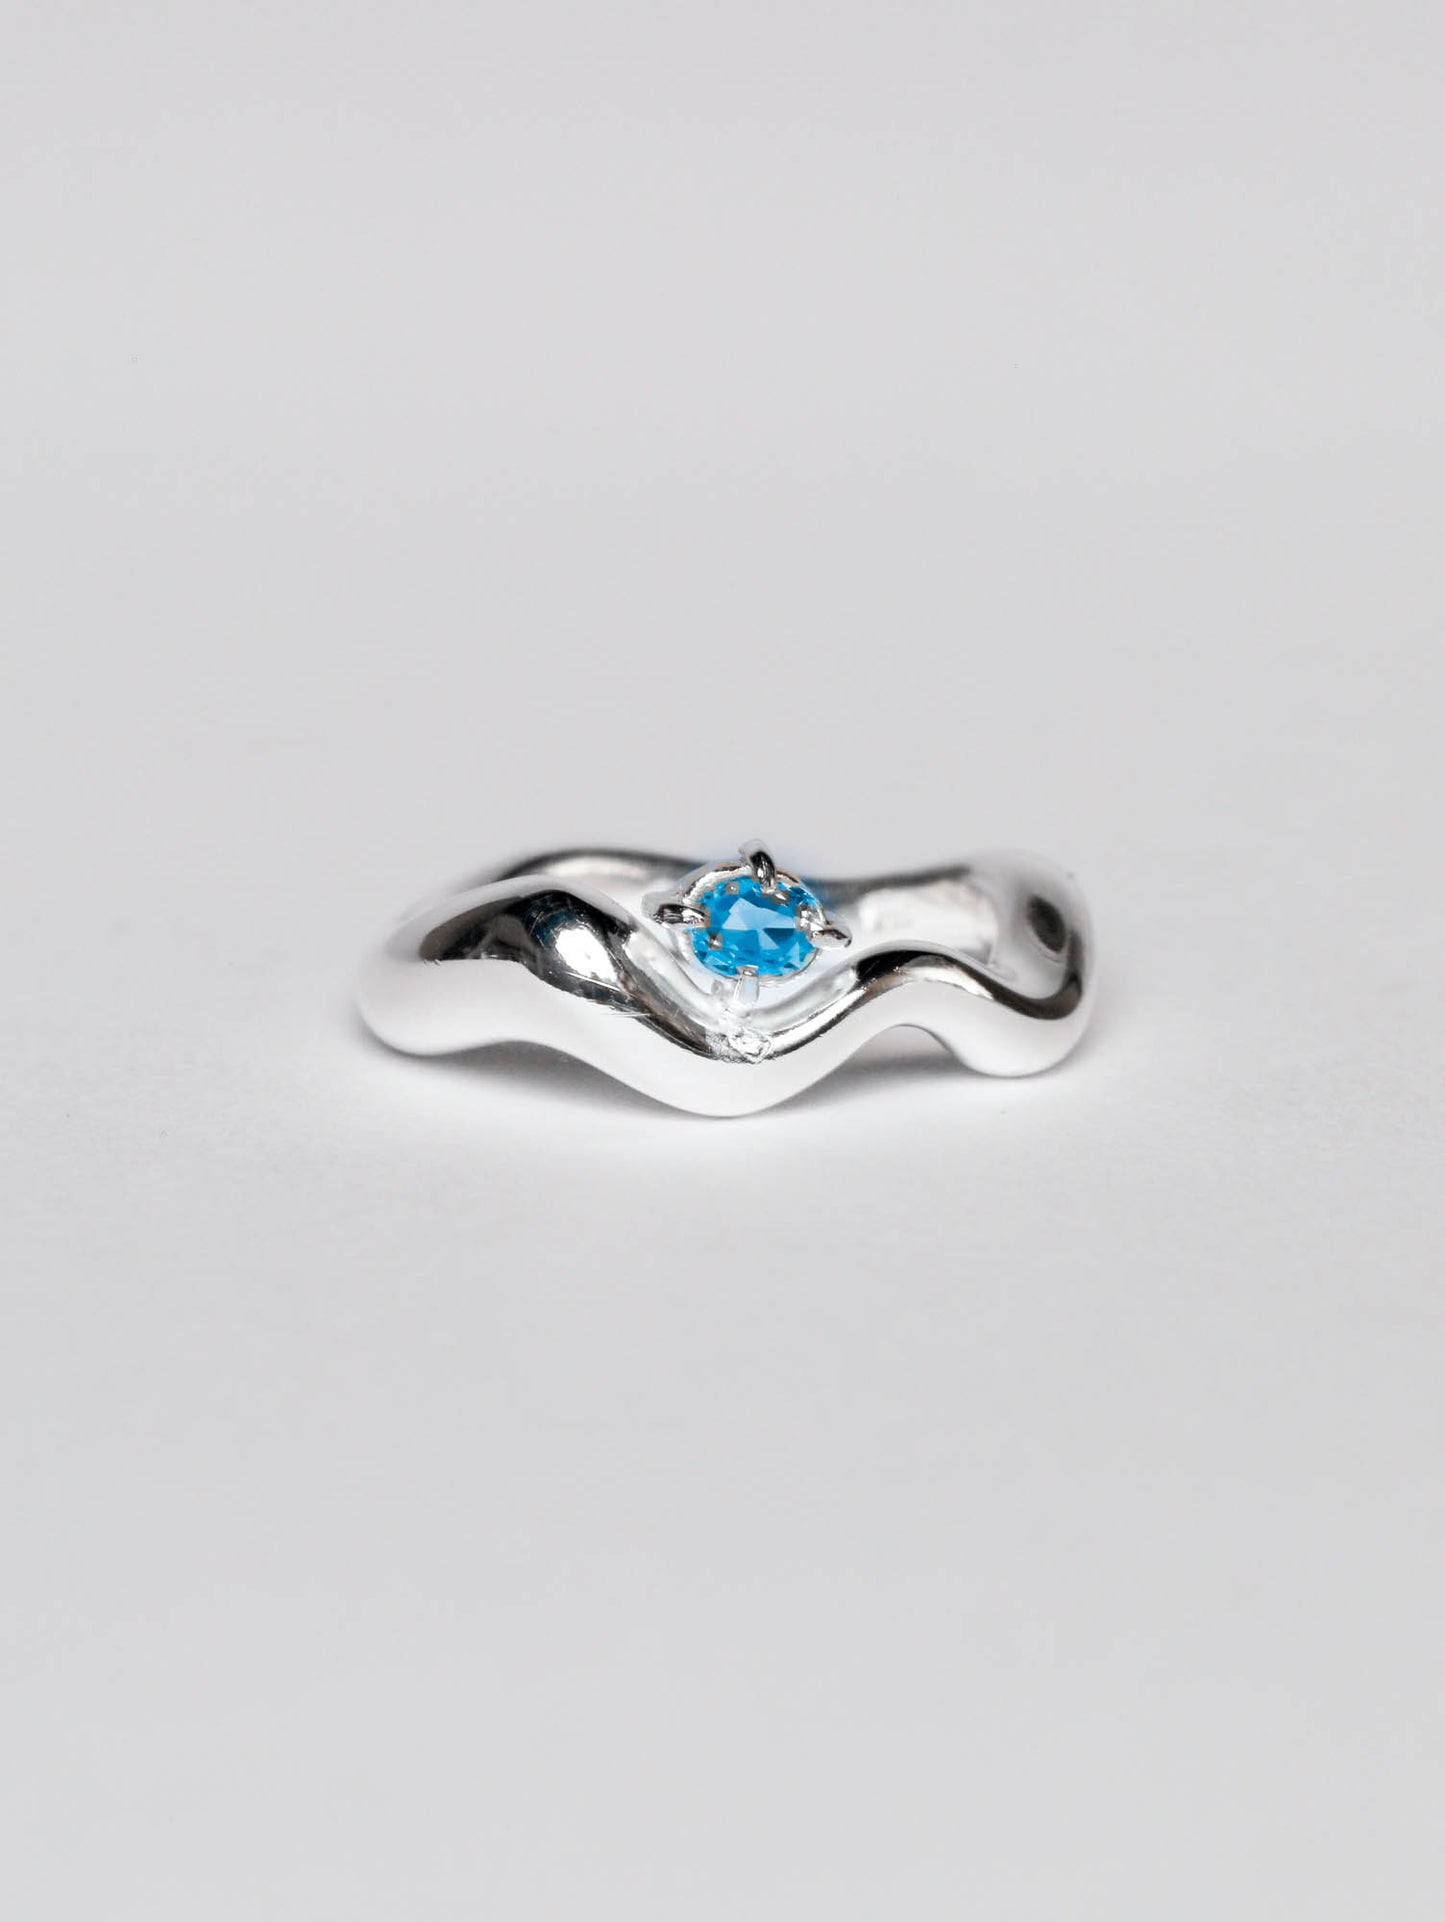 Wave Ring Silver with single Sapphire Stone # 3 | Size 7.5